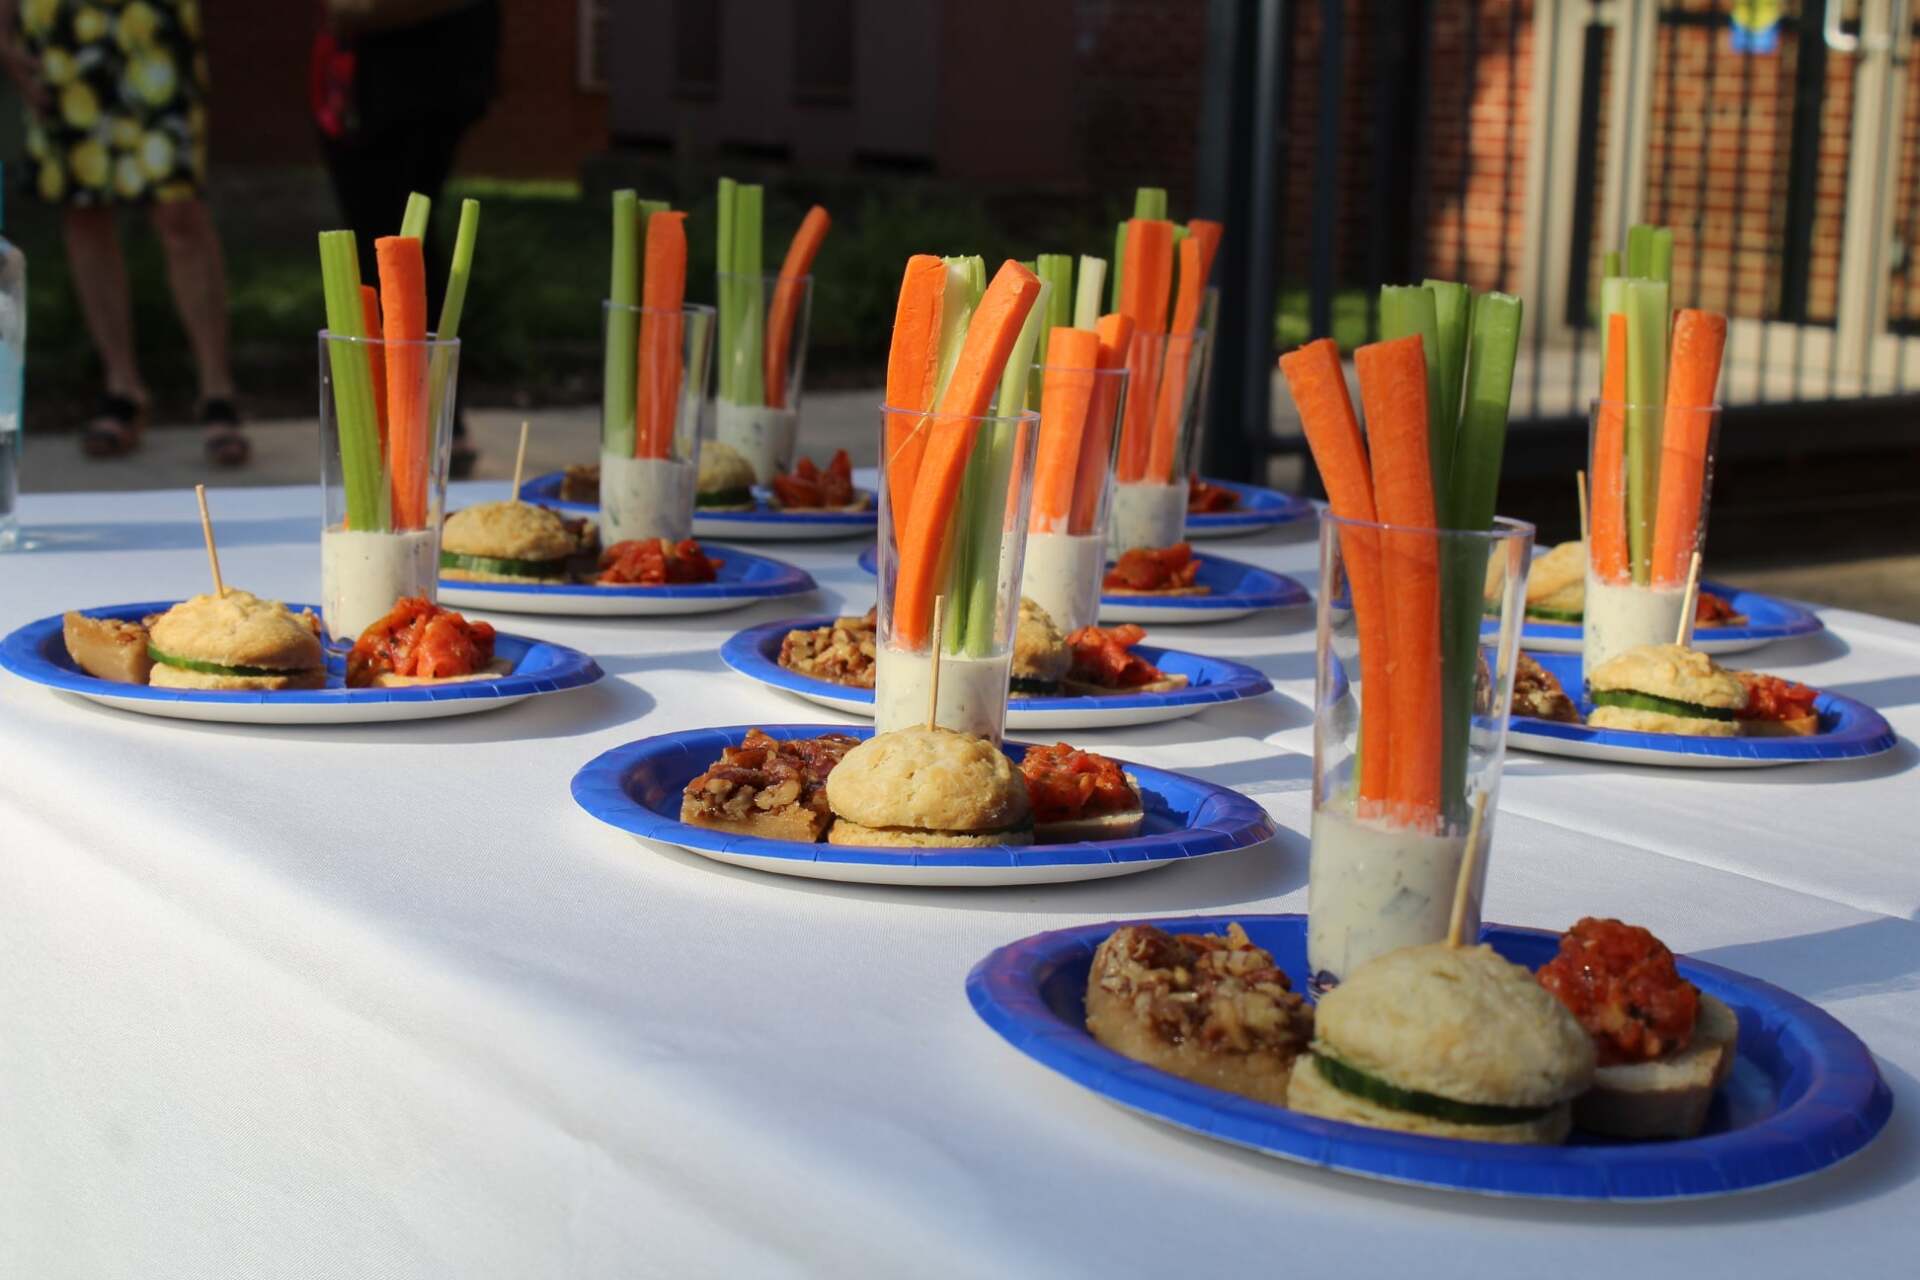 image of food served at the Syntelligent event